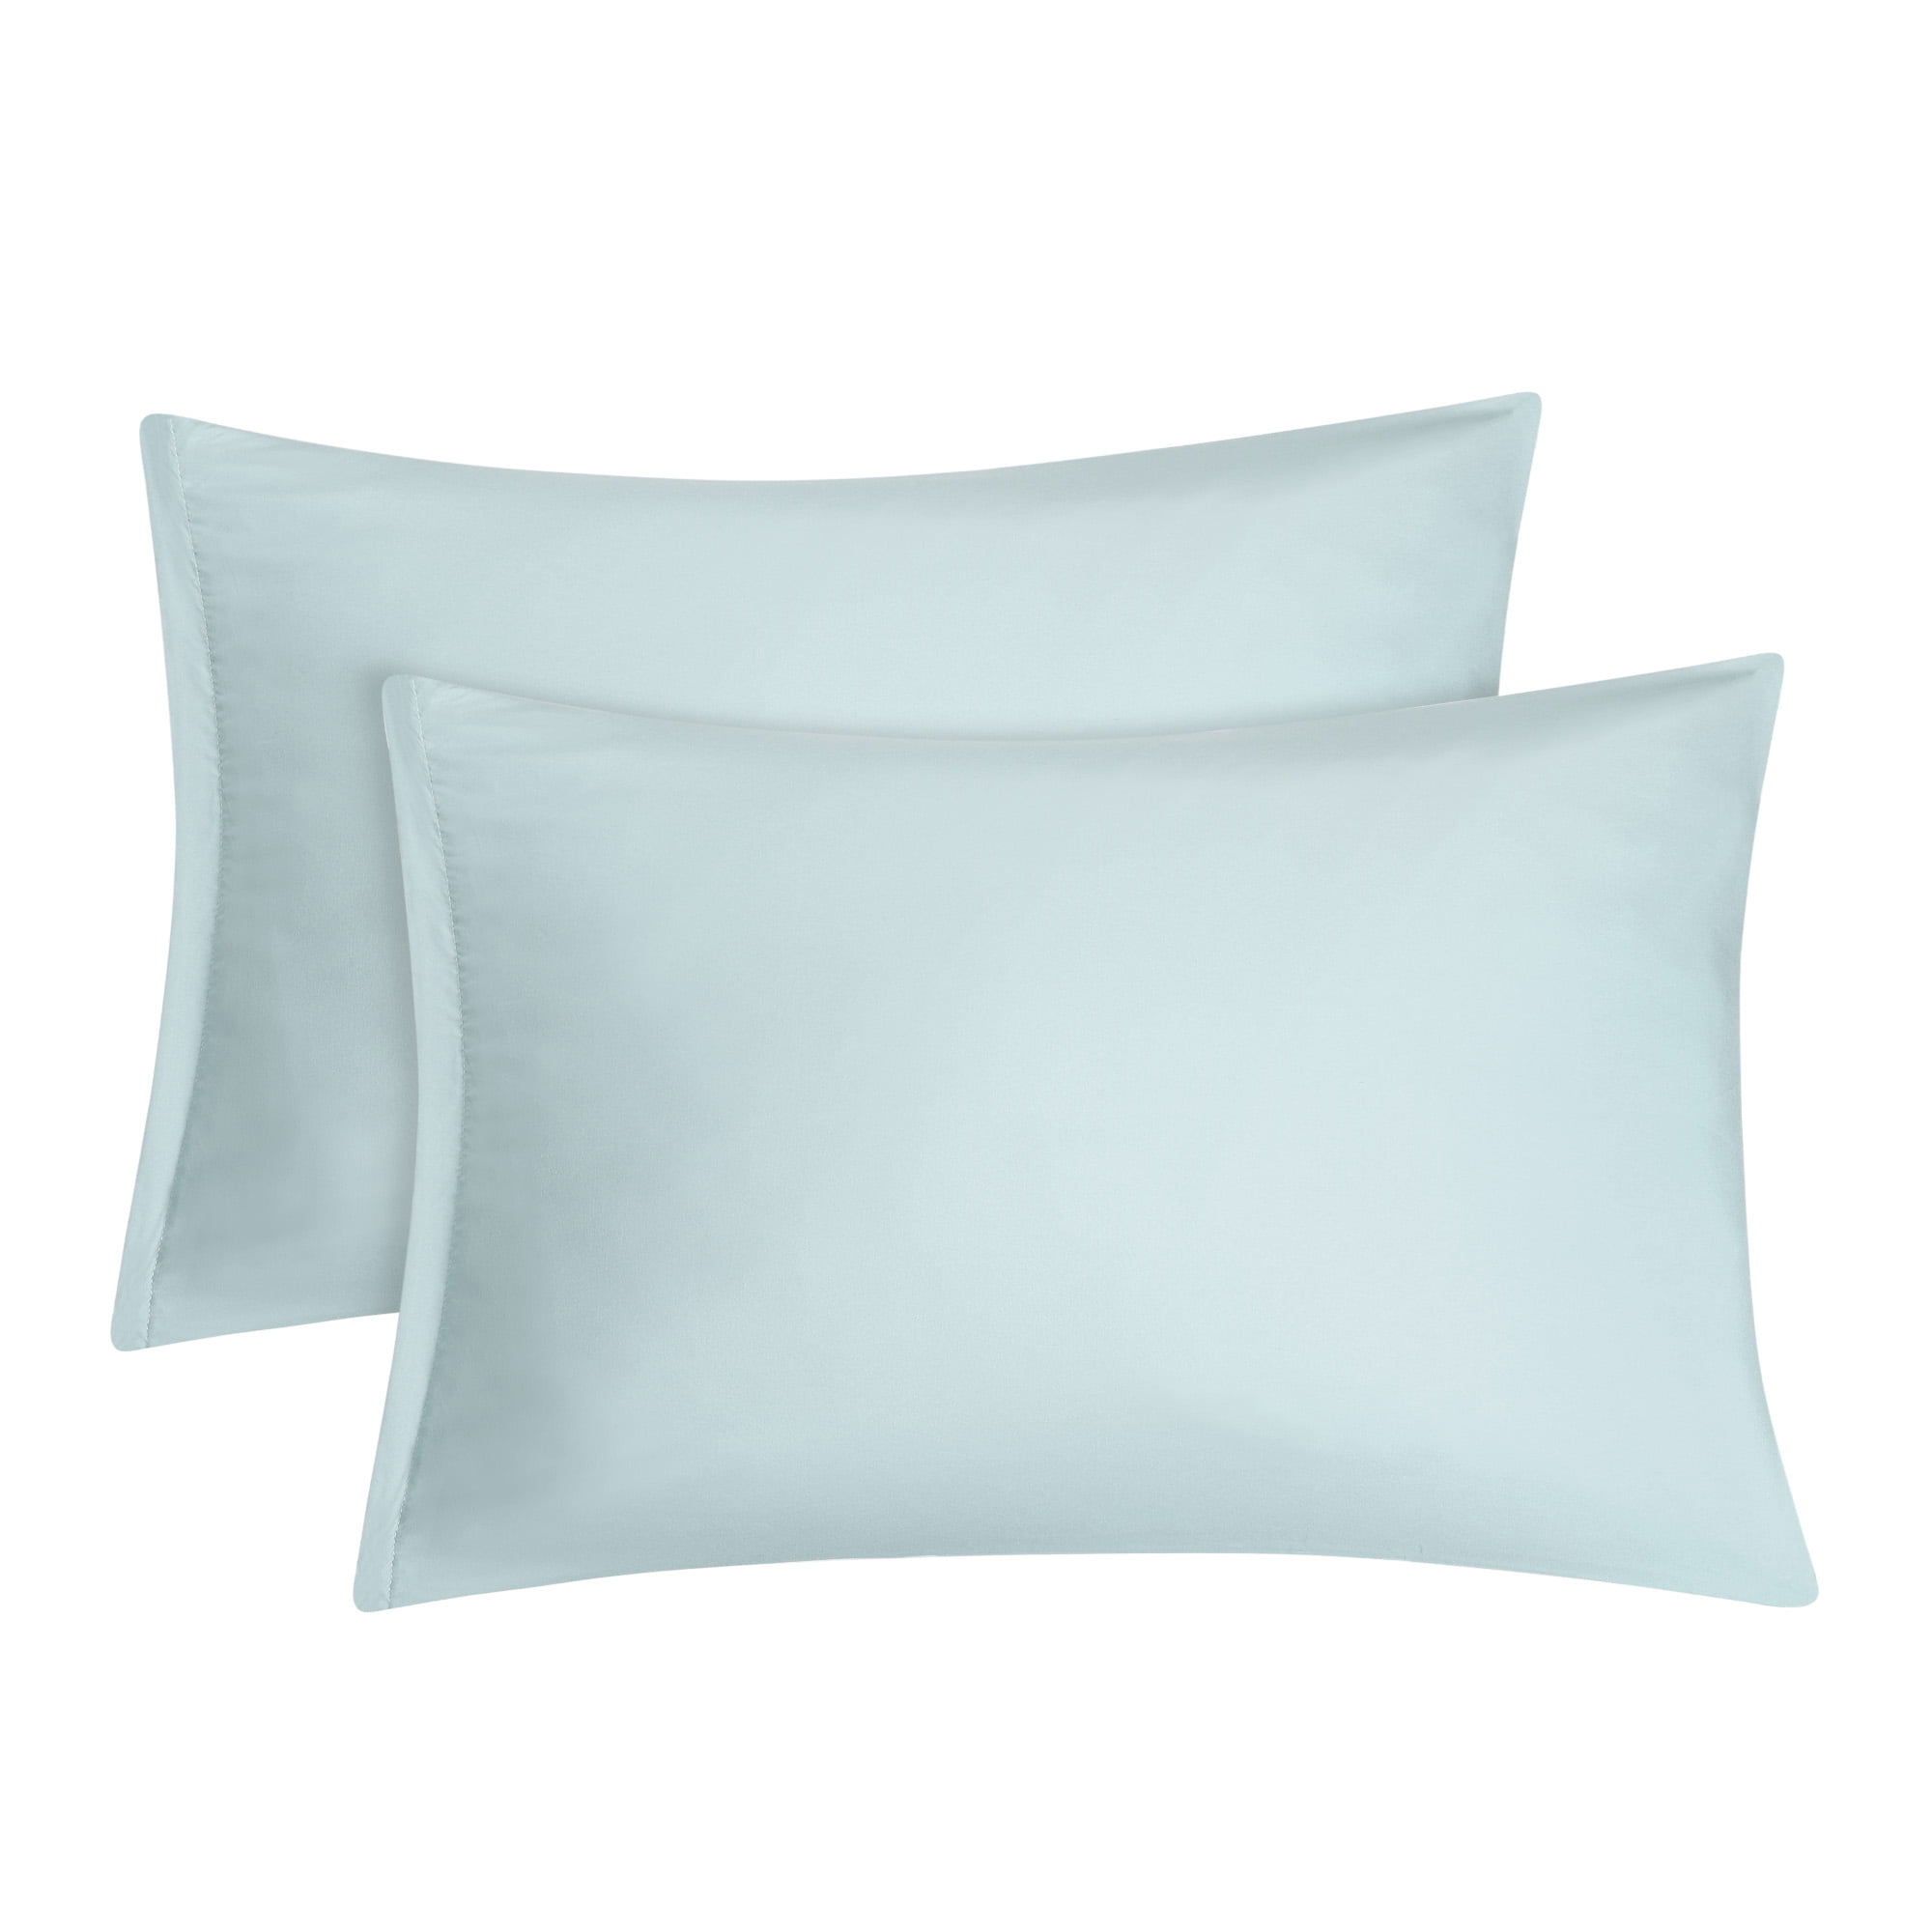 2 Pack Travel Size Pillowcases Soft 